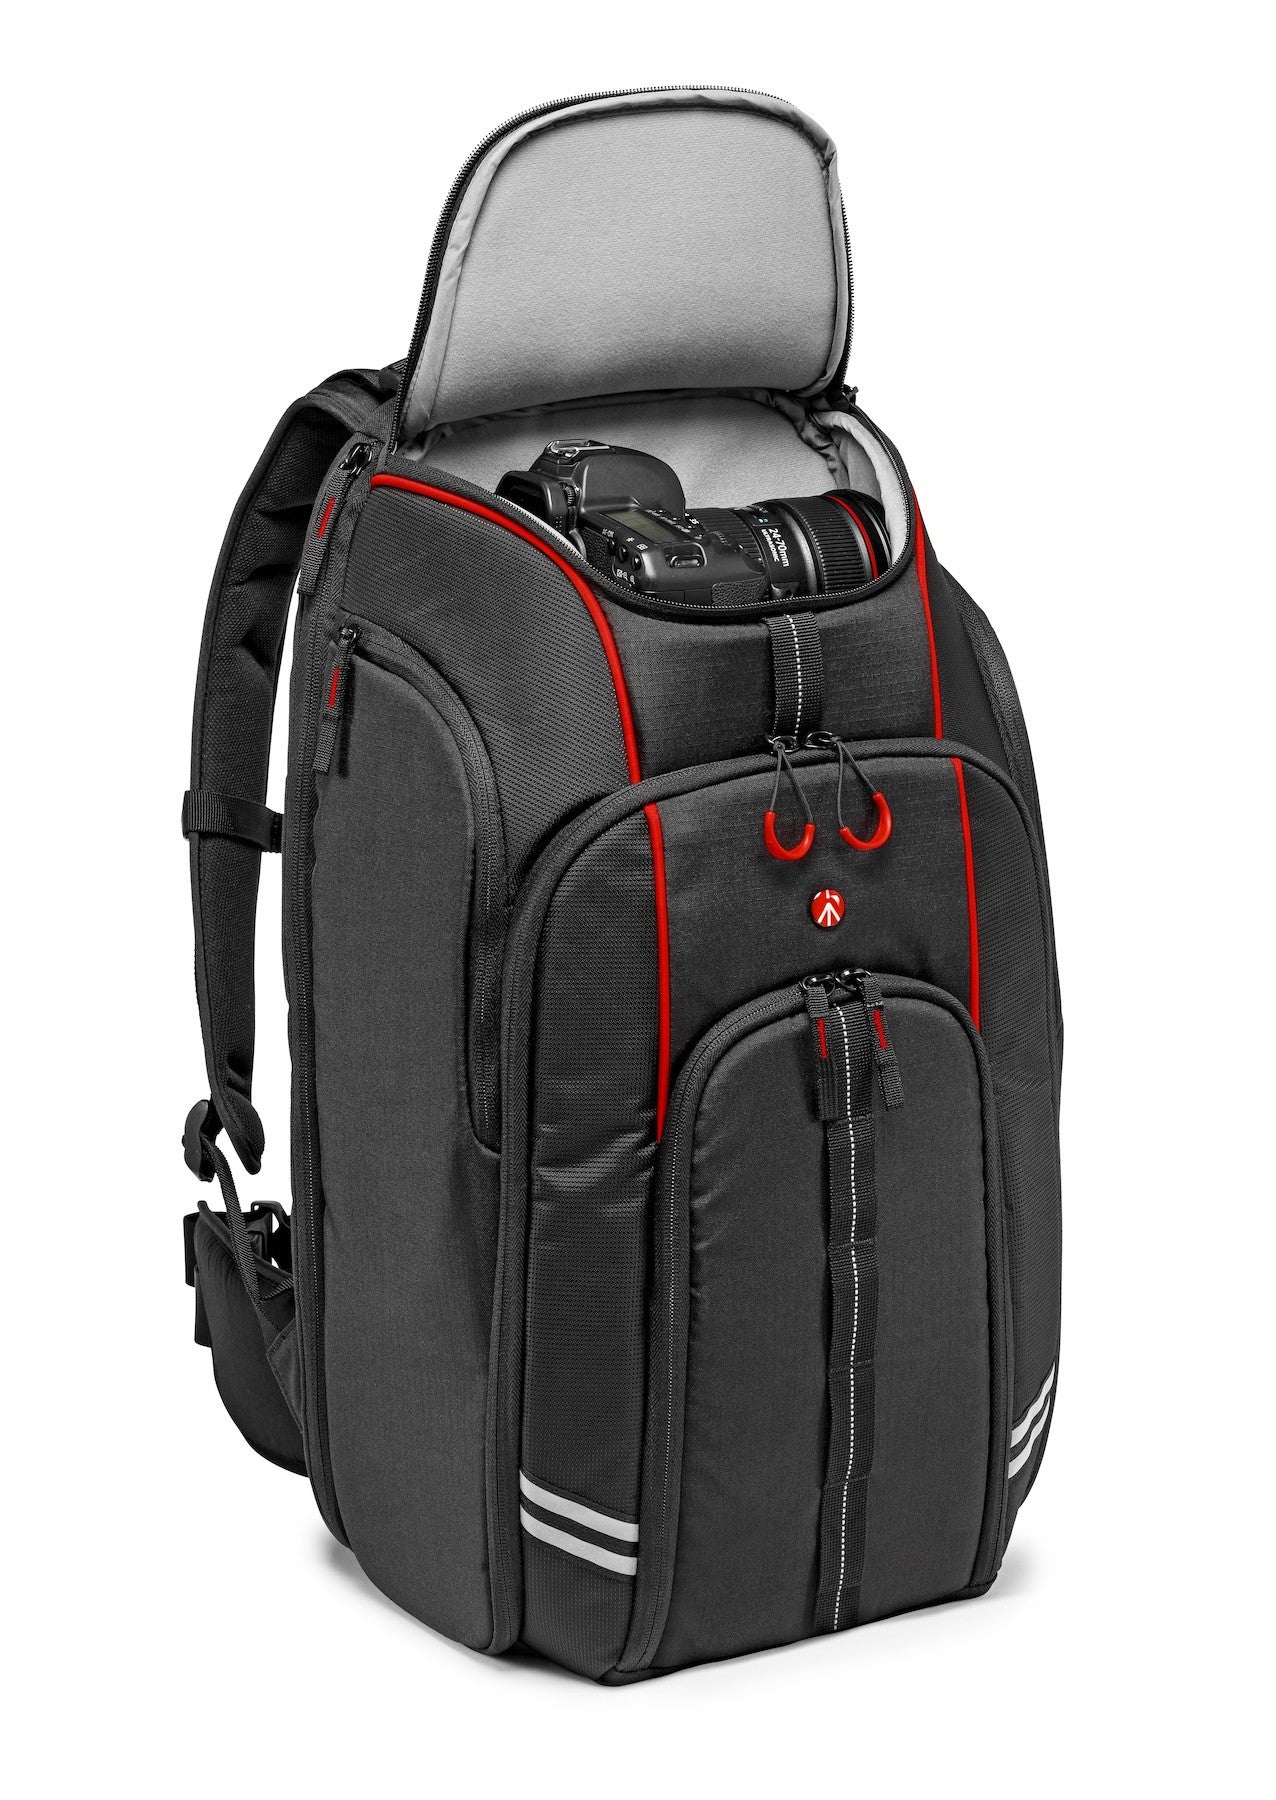 Manfrotto MB BP-D1 Drone Backpack, bags backpacks, Manfrotto - Pictureline  - 5